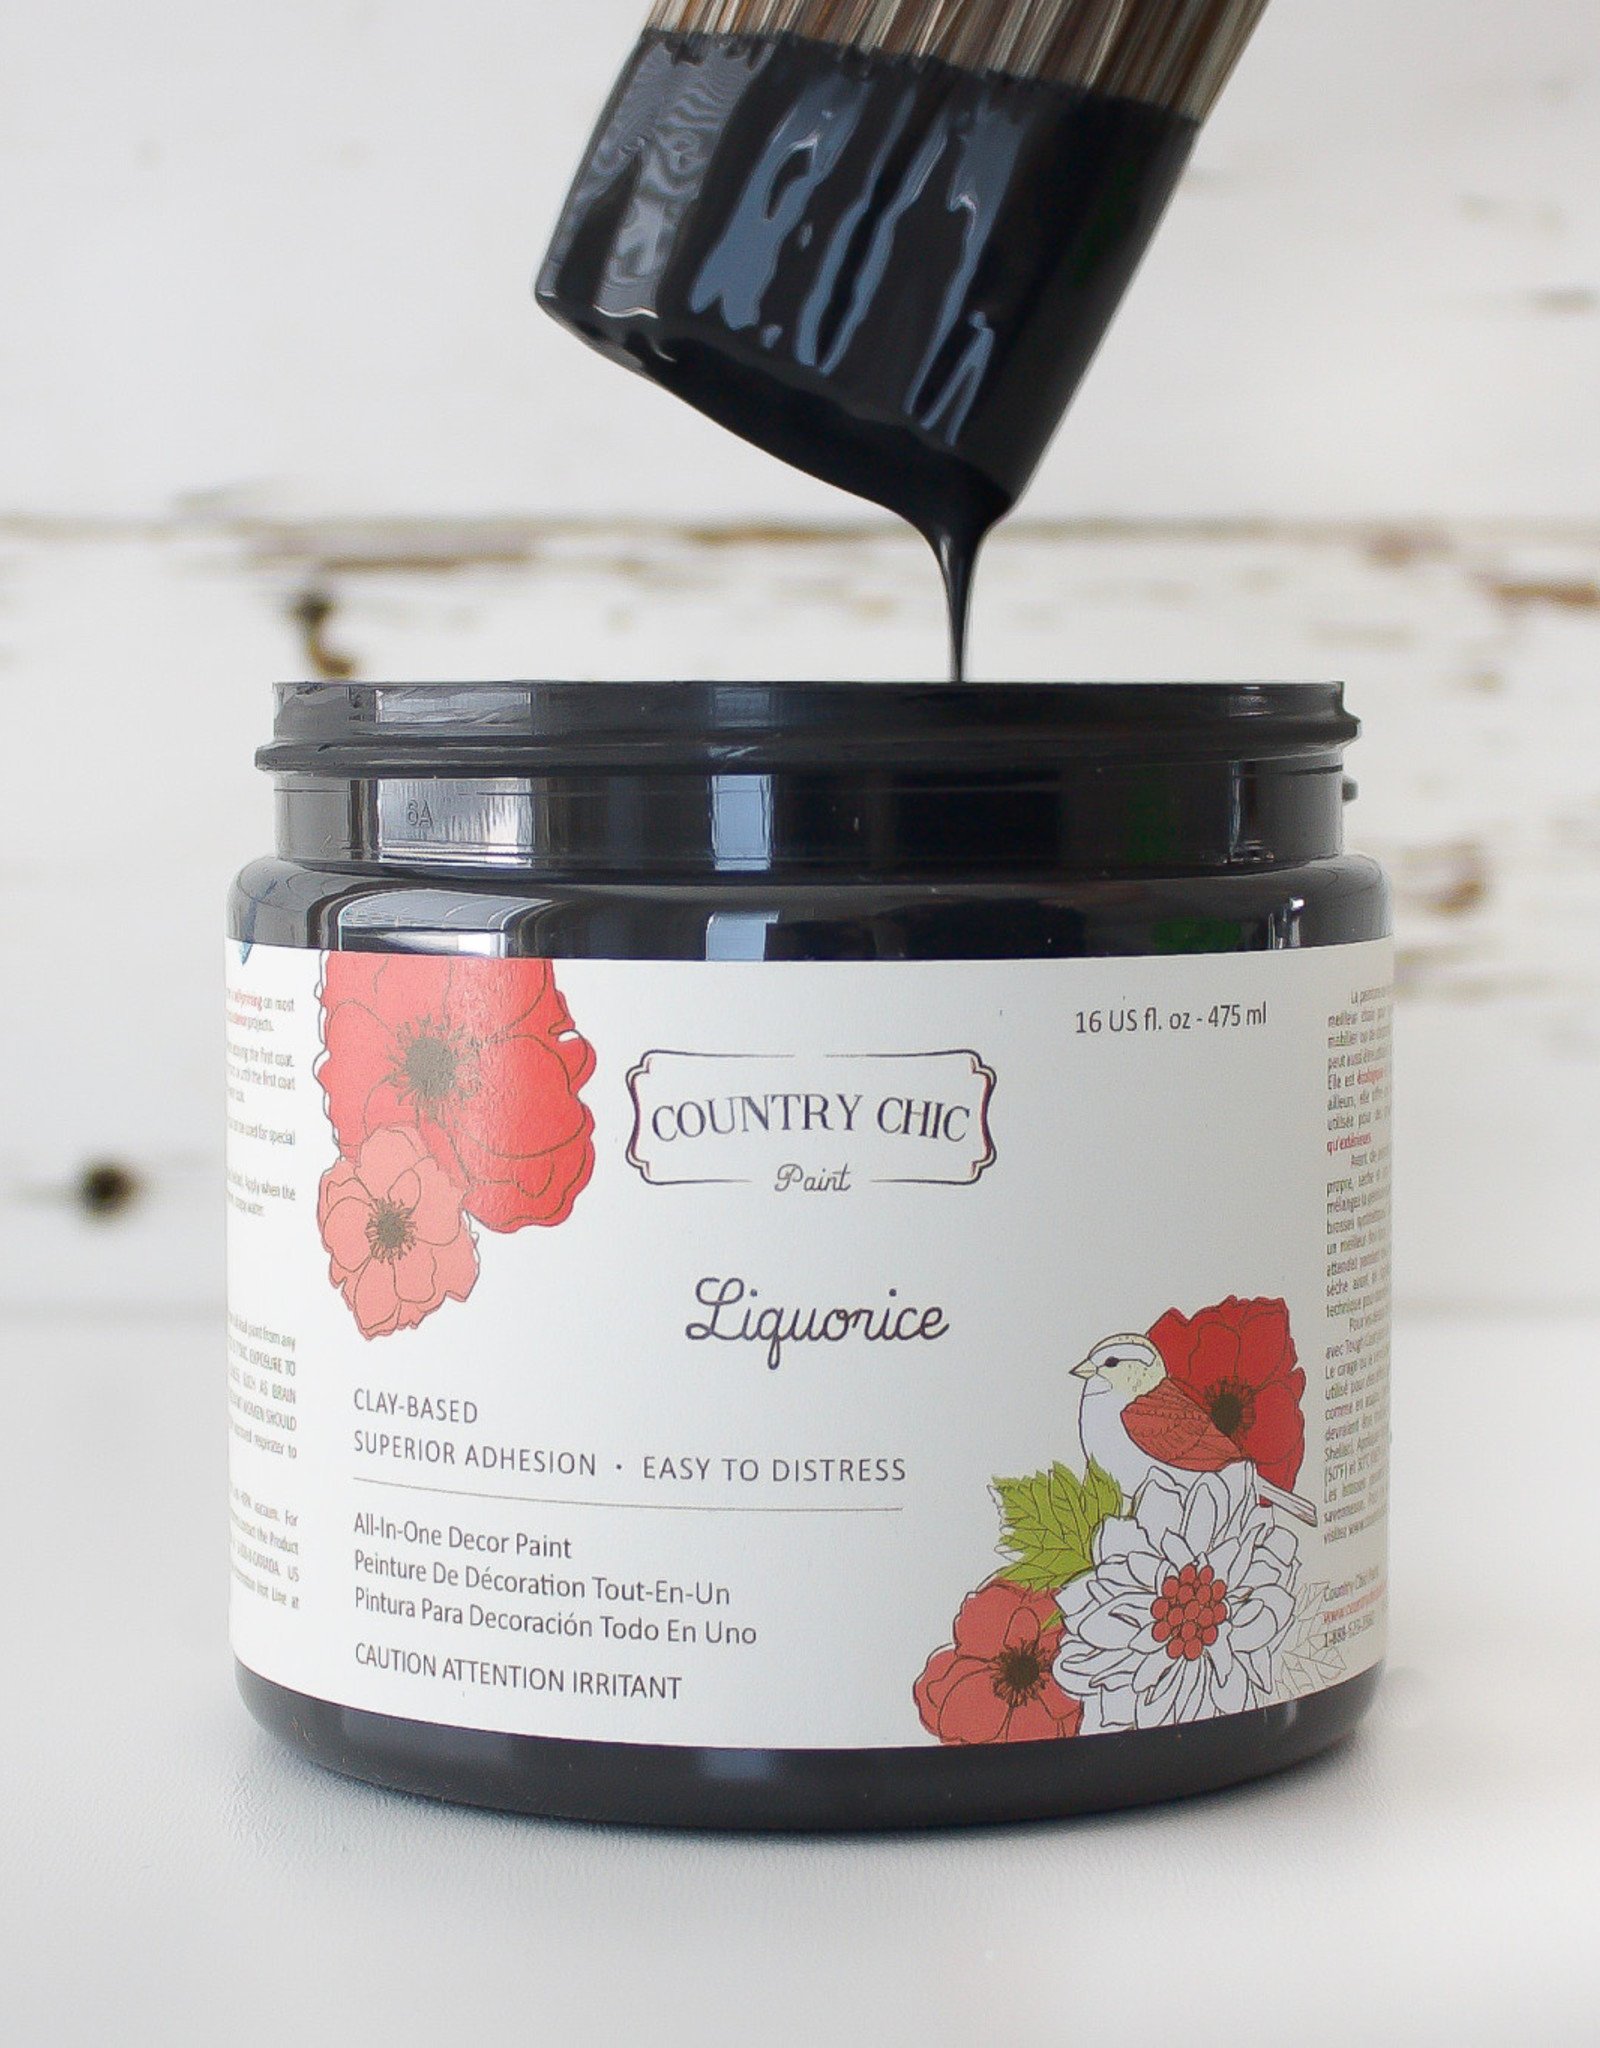 Country Chic Country Chic Paint Sample - 4oz Liquorice